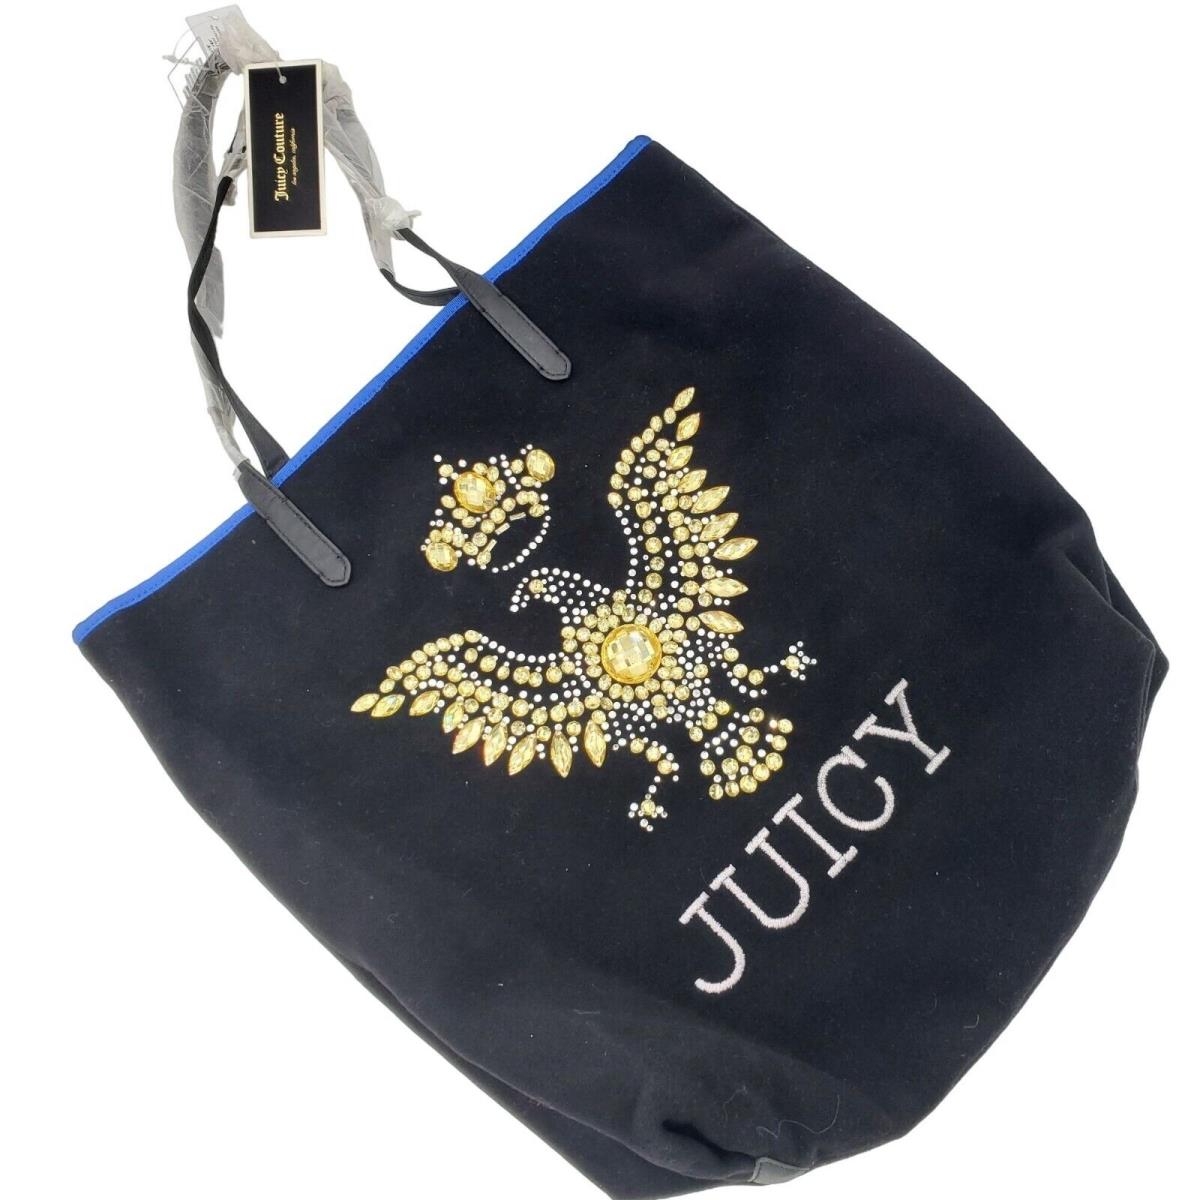 Juicy Couture Candy Blue & White Hollyhock Tote Bag BRAND NEW WITH TAGS |  eBay